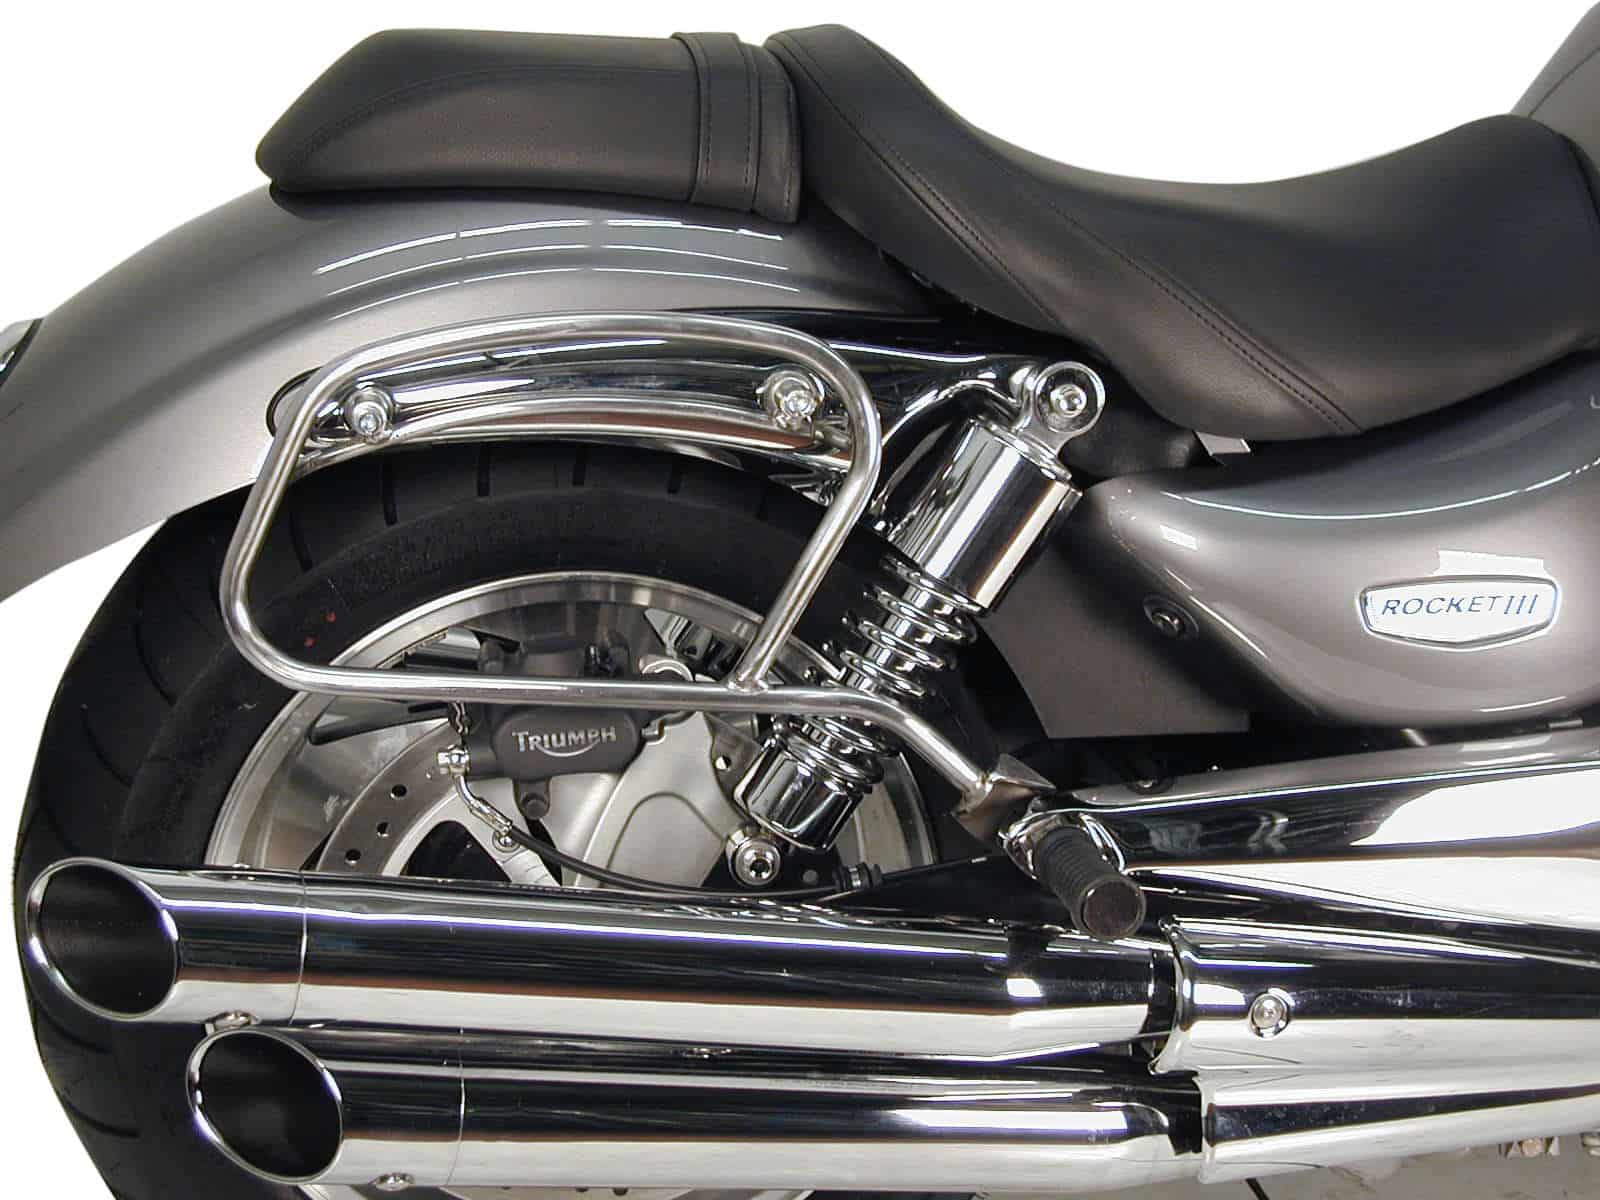 Leather bag holder tube-type - chrome for Triumph Rocket III (2004-2009)